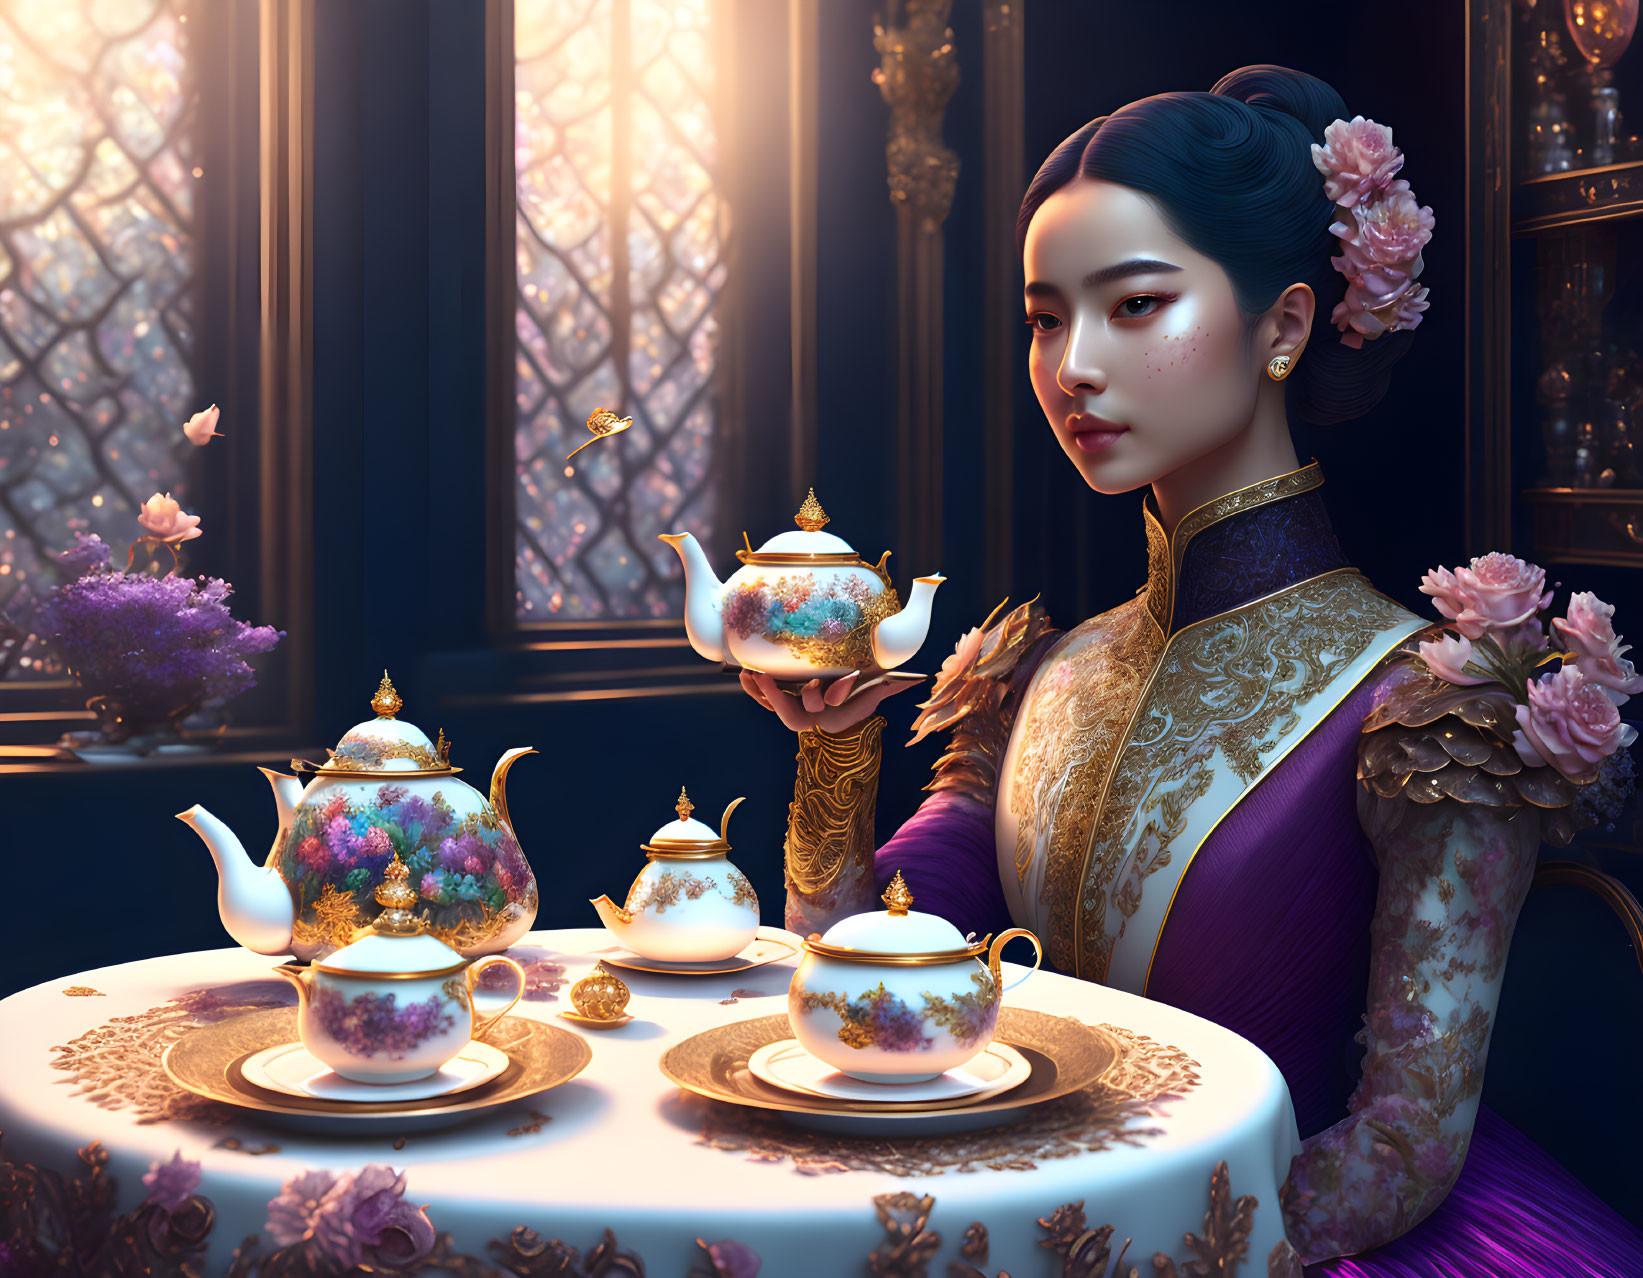 Traditional tea pouring at elegantly set table with blooming flowers